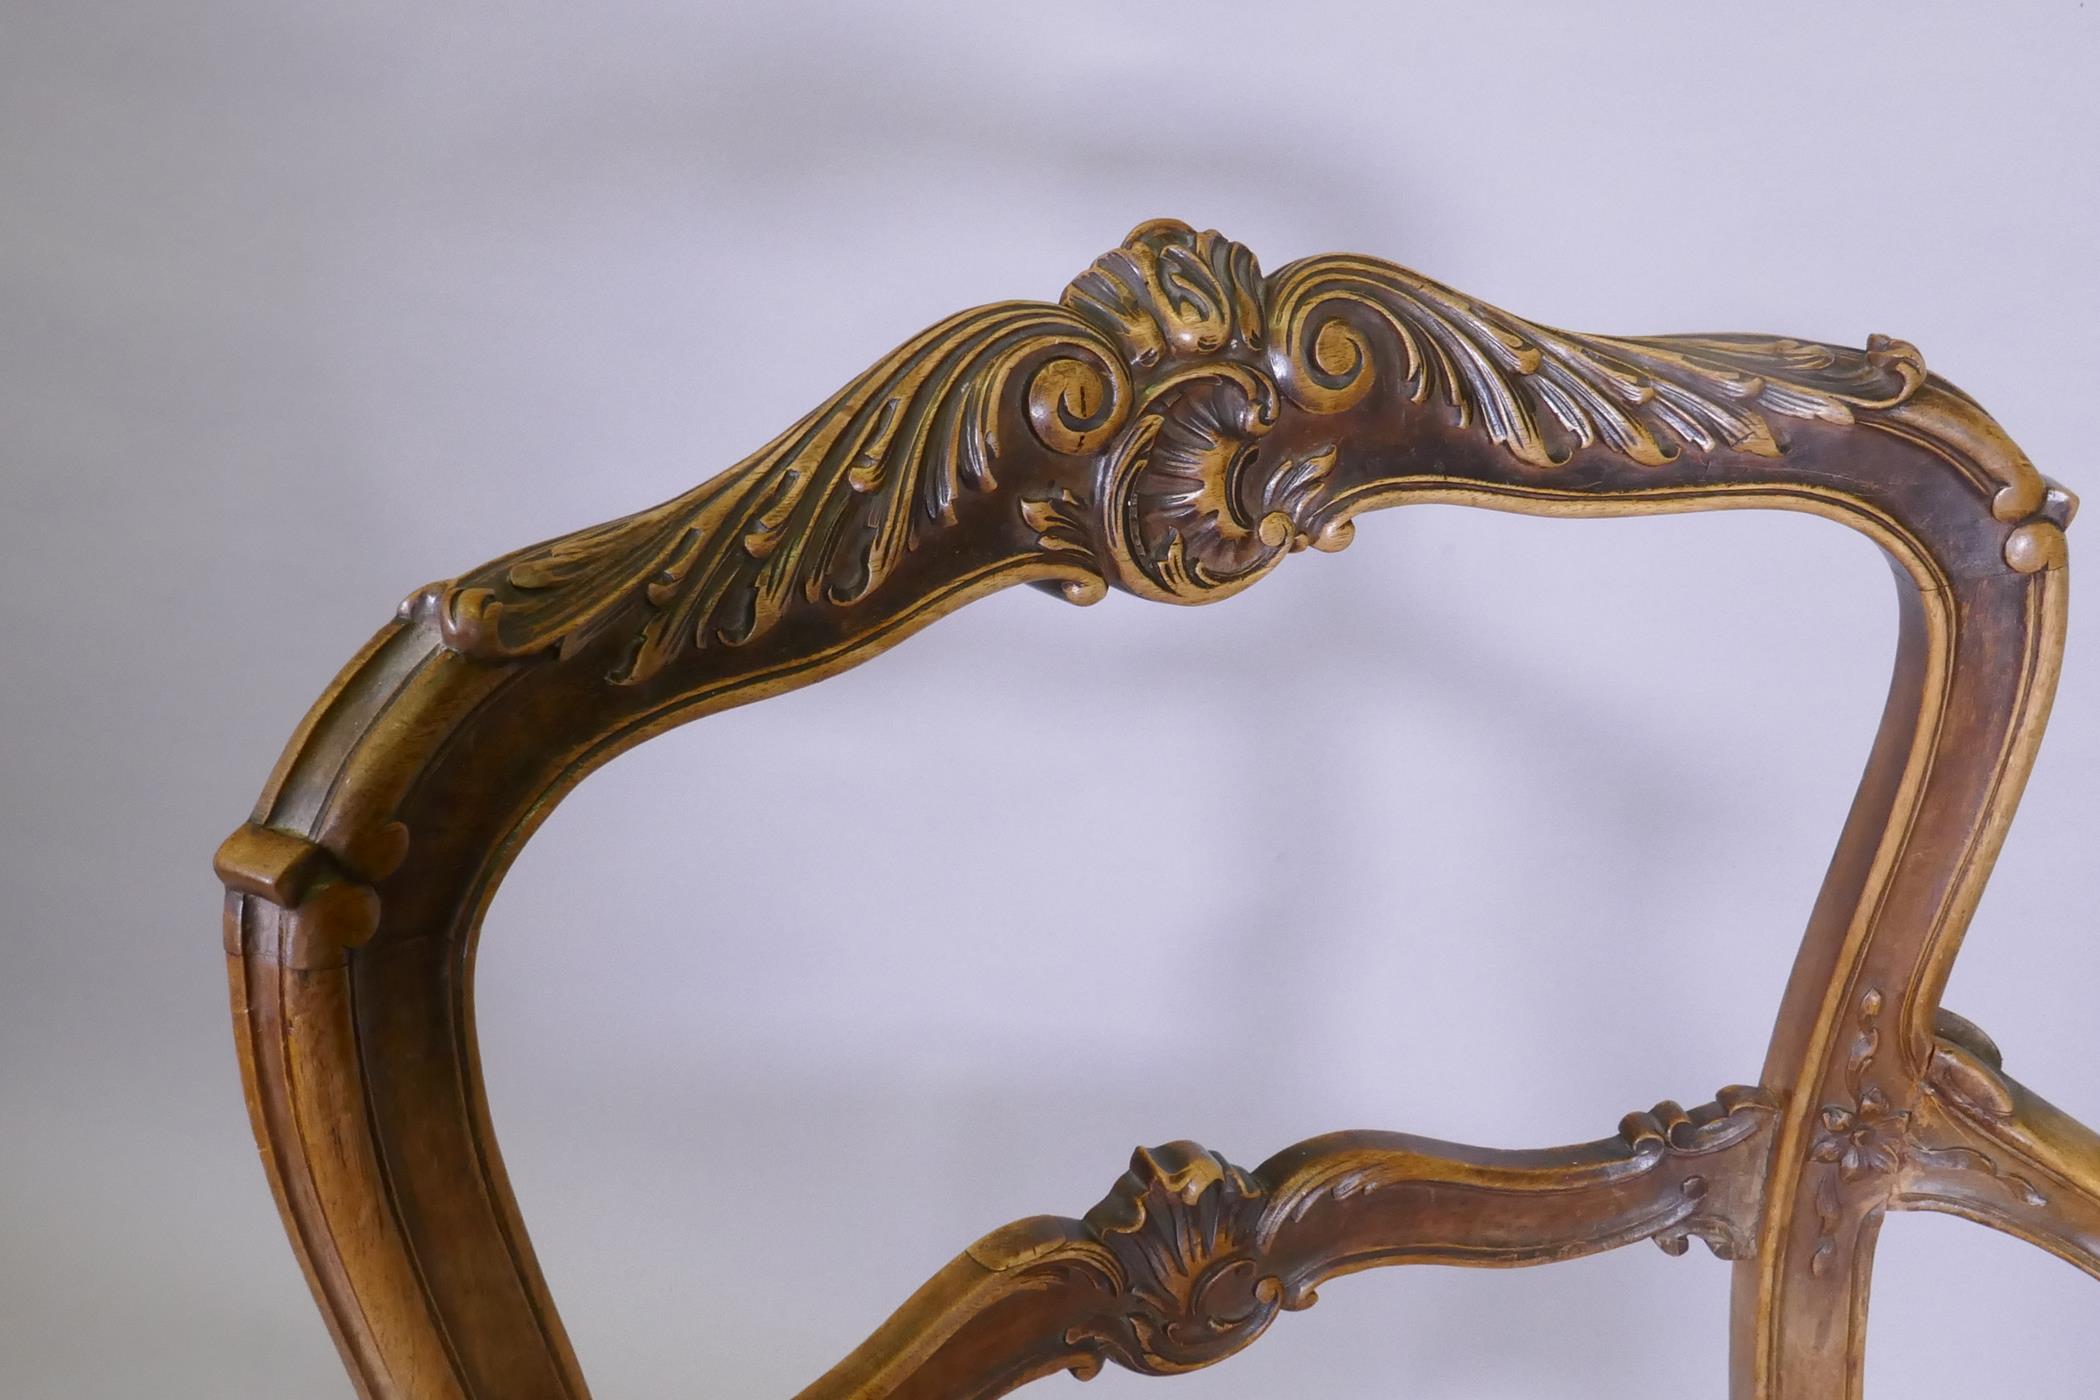 A C19th French carved walnut open arm chair with caned seat - Image 4 of 5